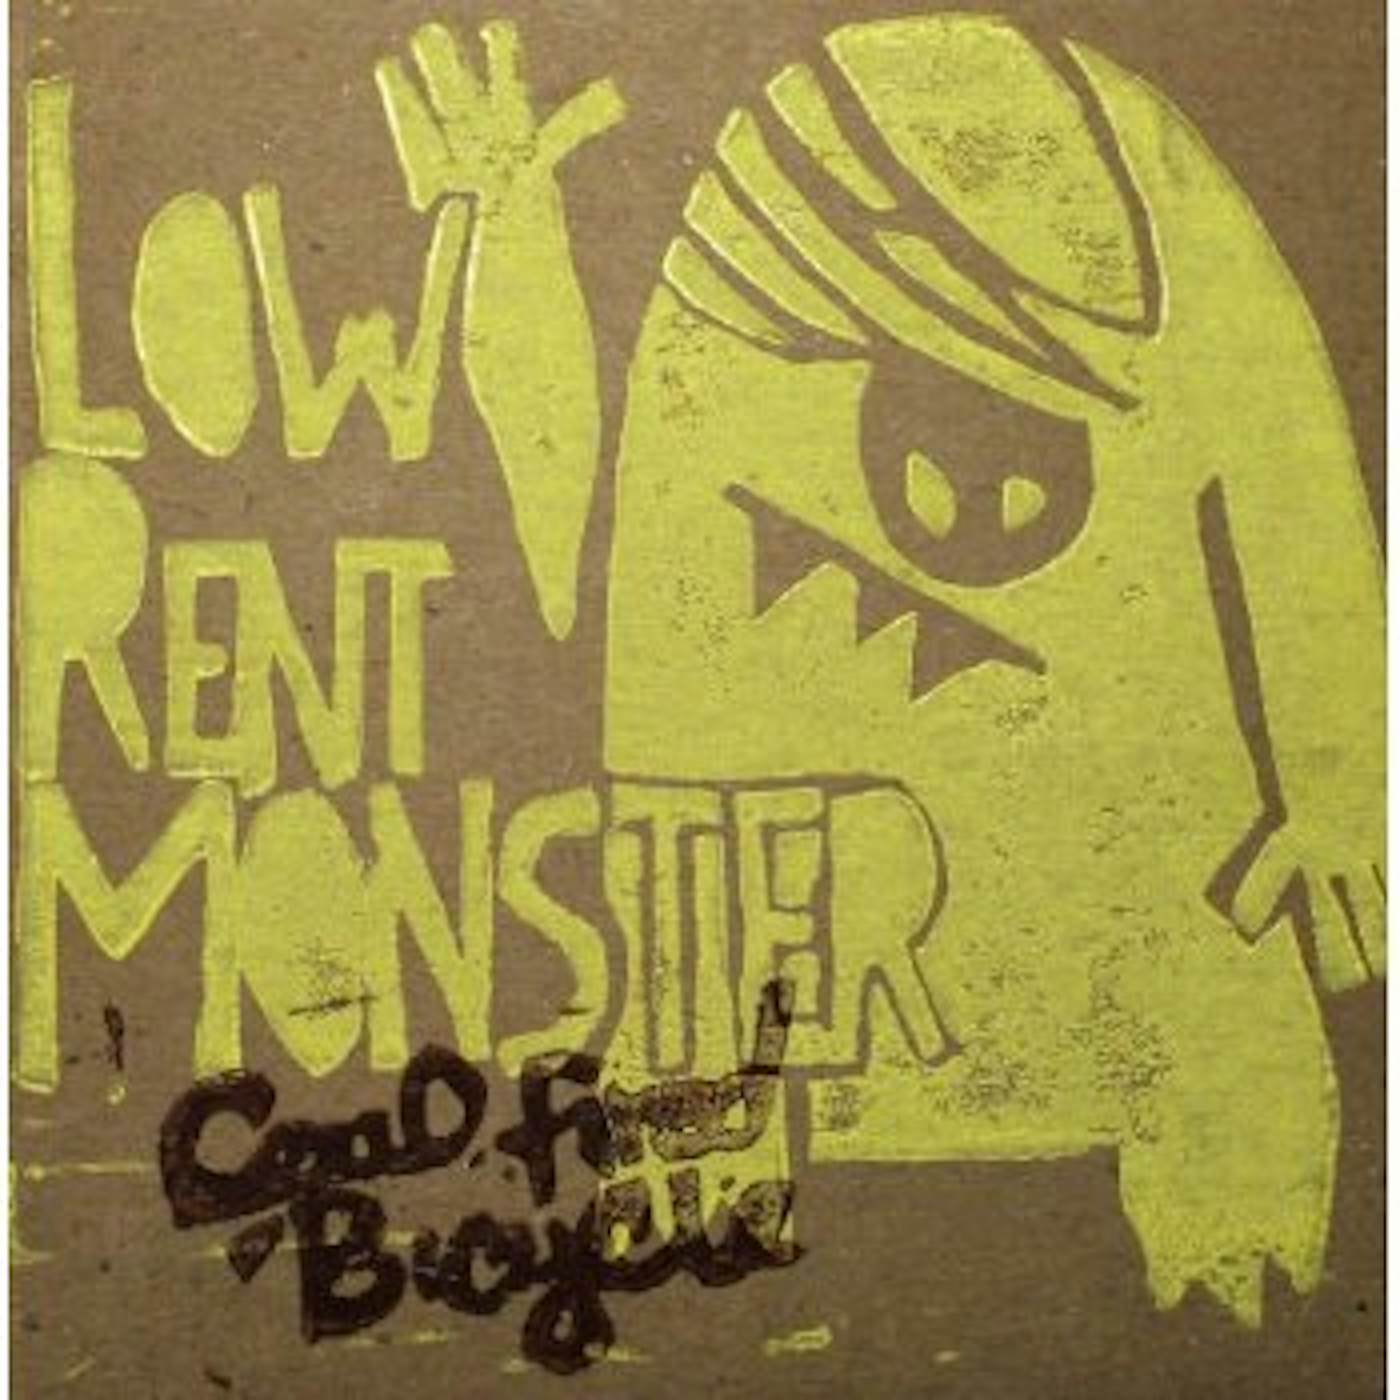 Coal Fired Bicycle LOW RENT MONSTER CD